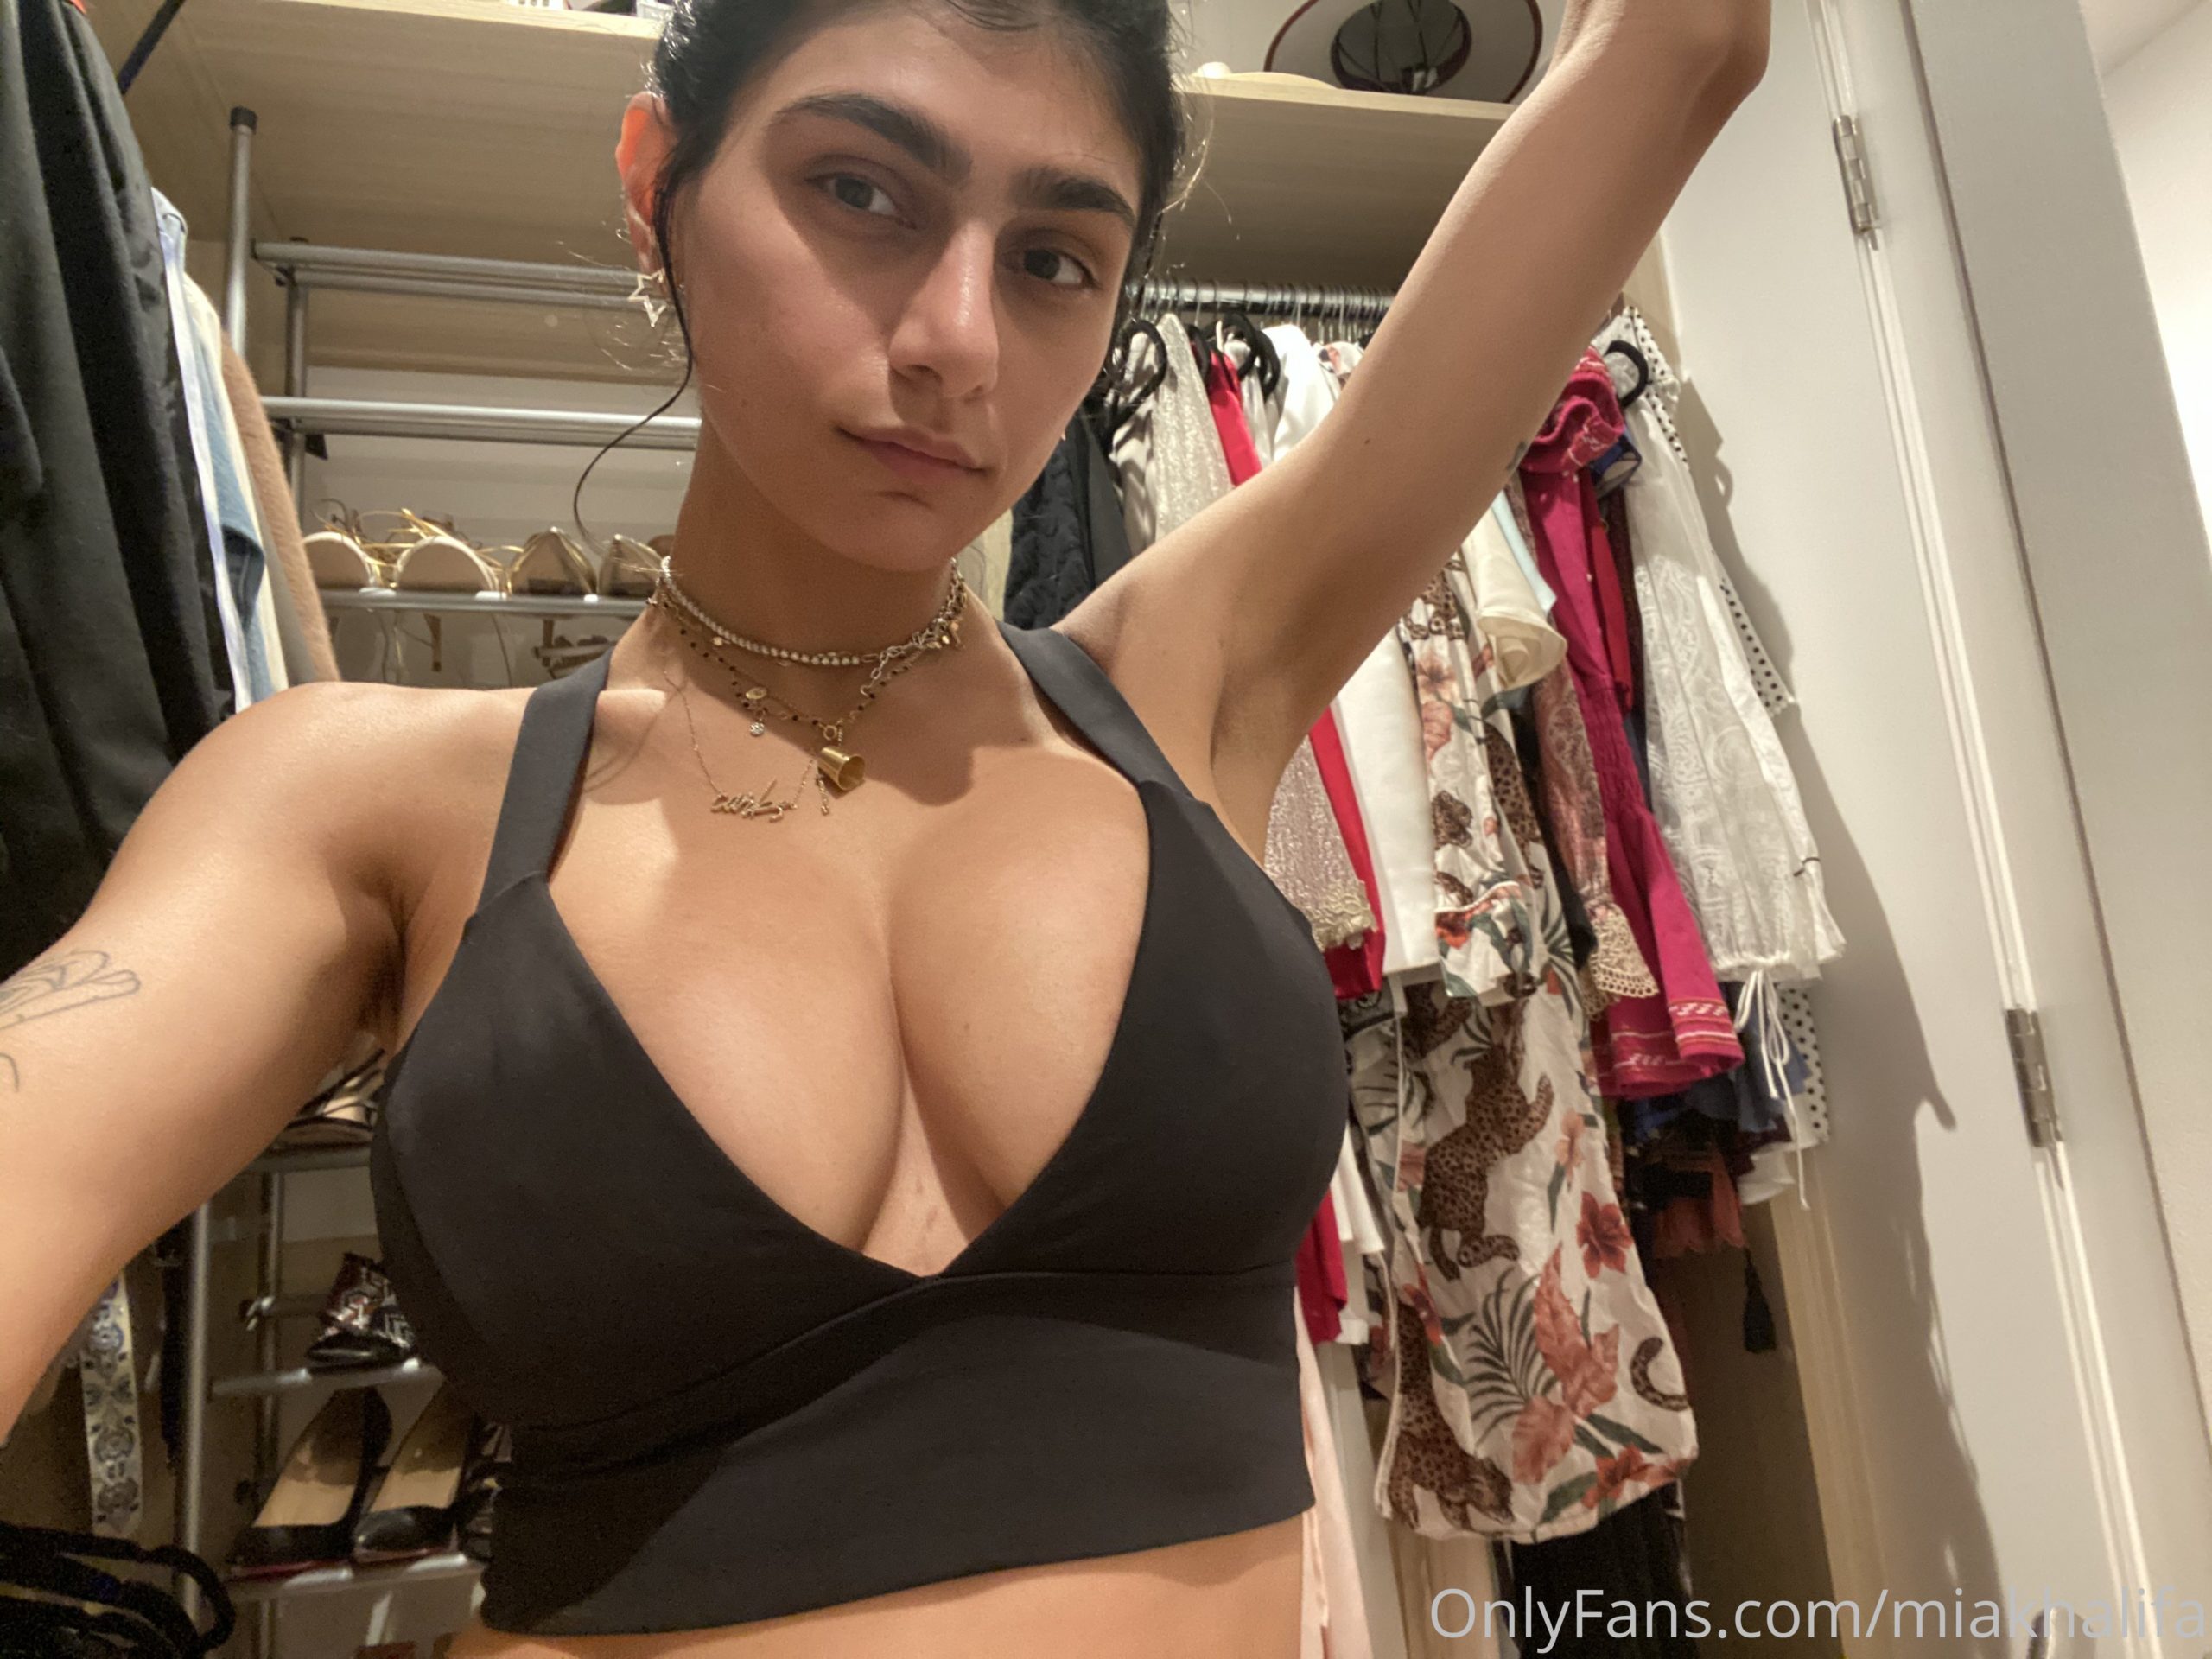 miakhalifa 08 10 2020 135009759 Trapped in the... wardrobe. scaled